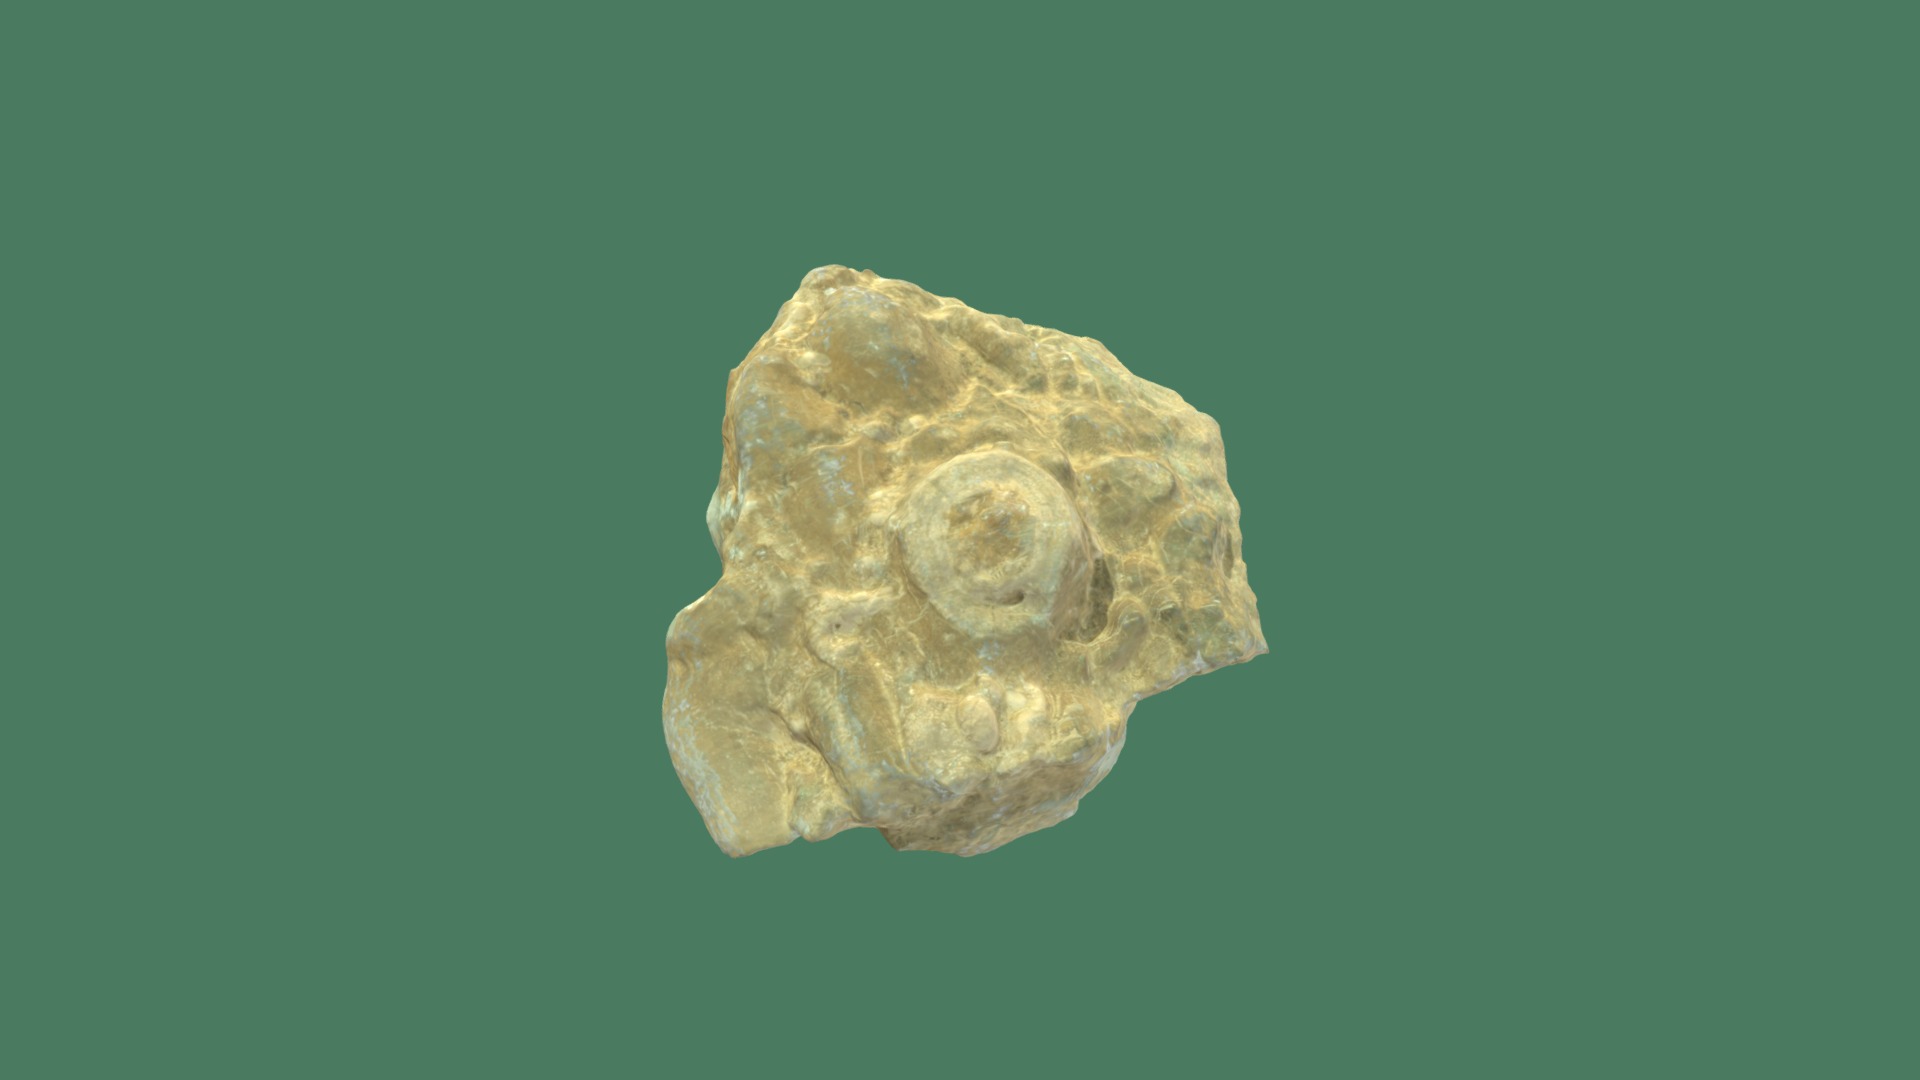 3D model Tom’s Find - This is a 3D model of the Tom's Find. The 3D model is about a rock on a green background.